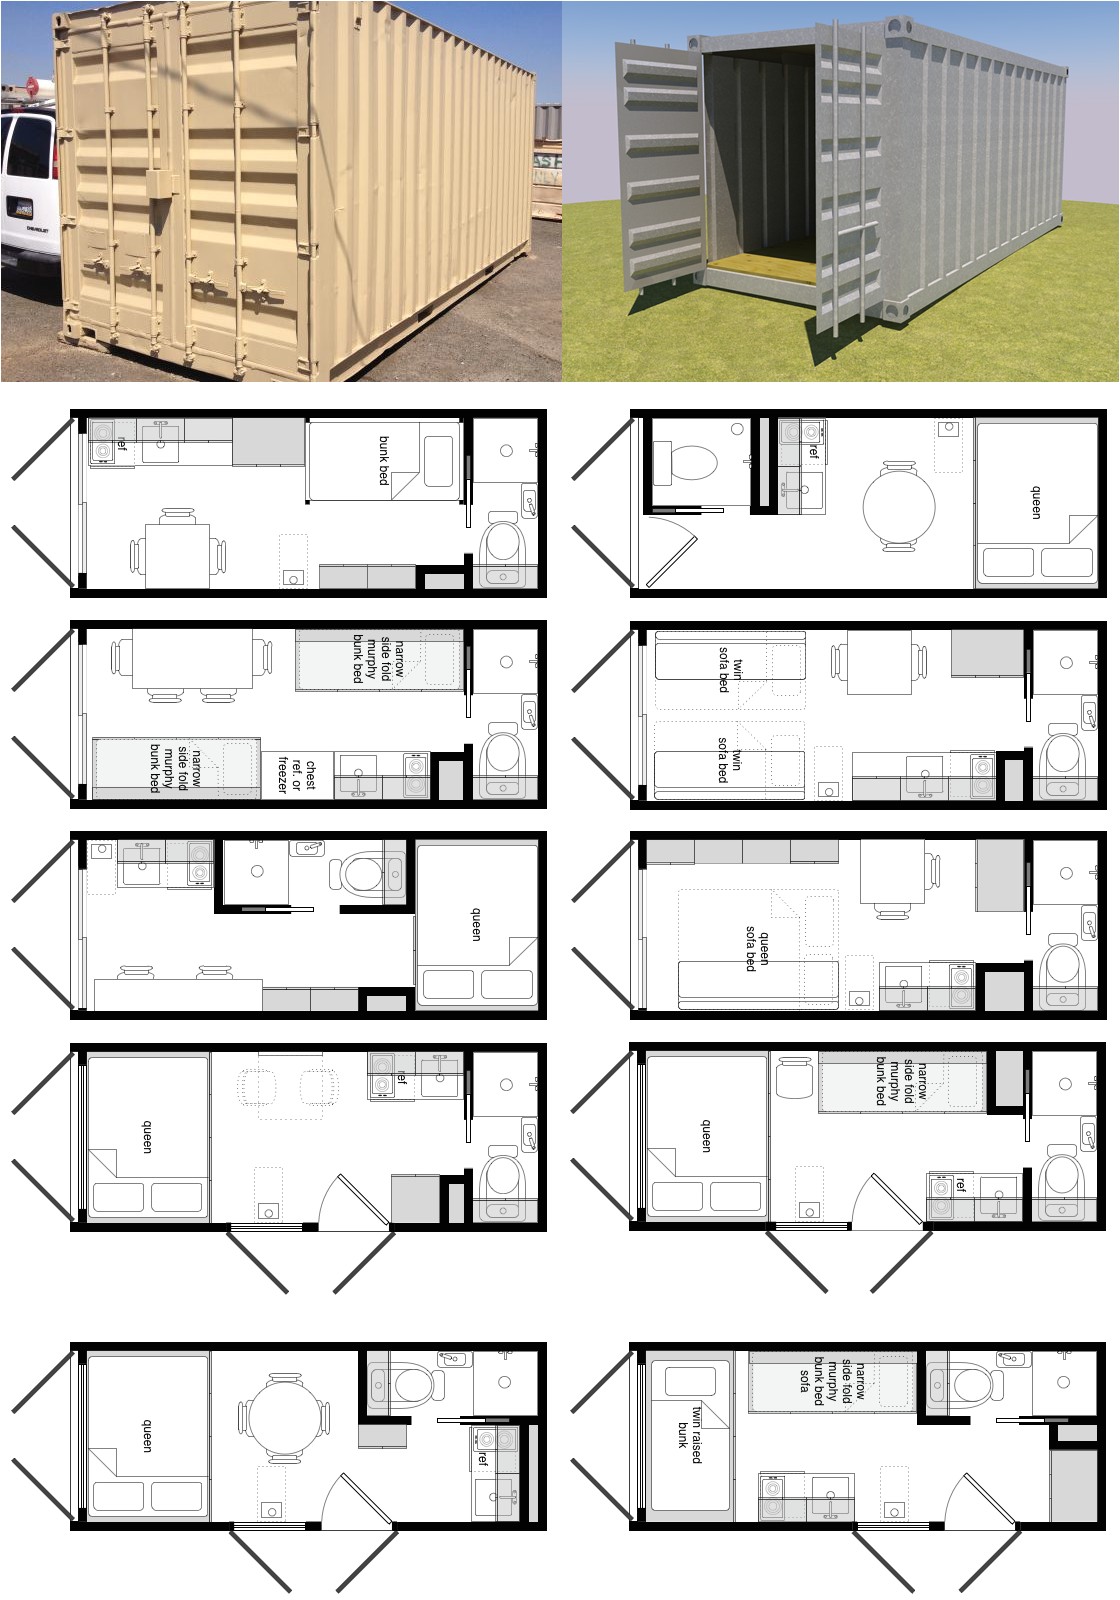 Shipping Container Home Floor Plan 20 Foot Shipping Container Floor Plan Brainstorm Ikea Decora